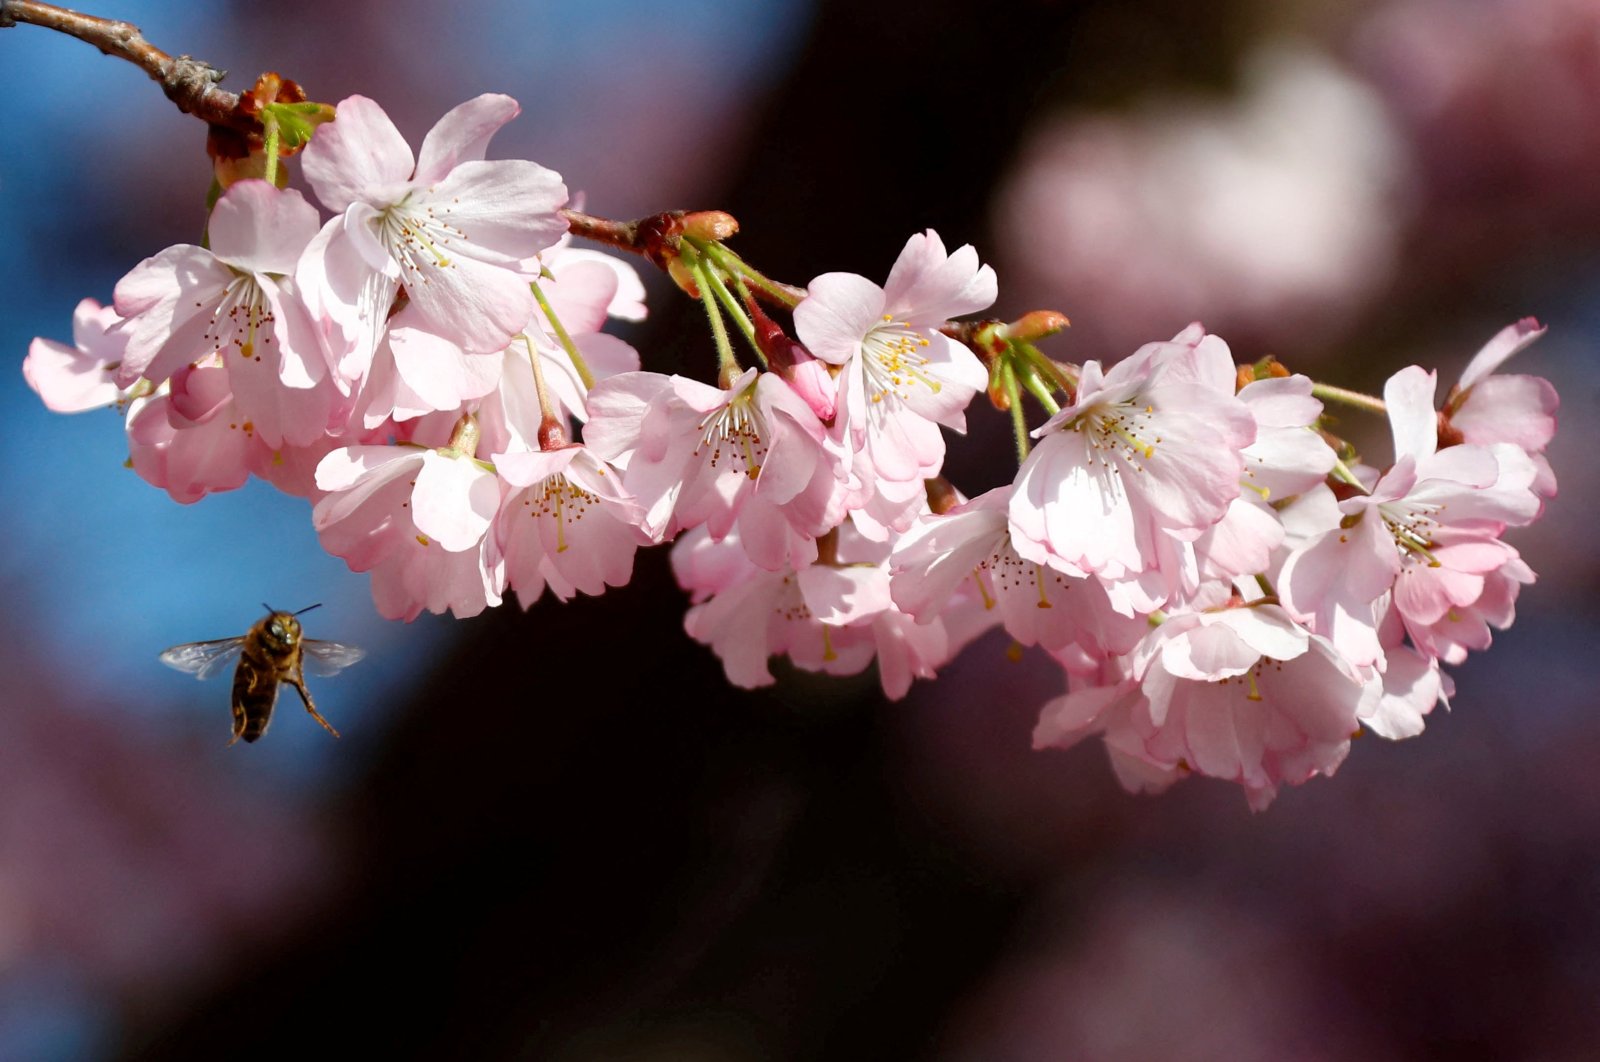 A bee flies toward a flower, during a cherry blossom season on a street at Lichterfelde district, in Berlin, Germany, March 30, 2019. (Reuters Photo)